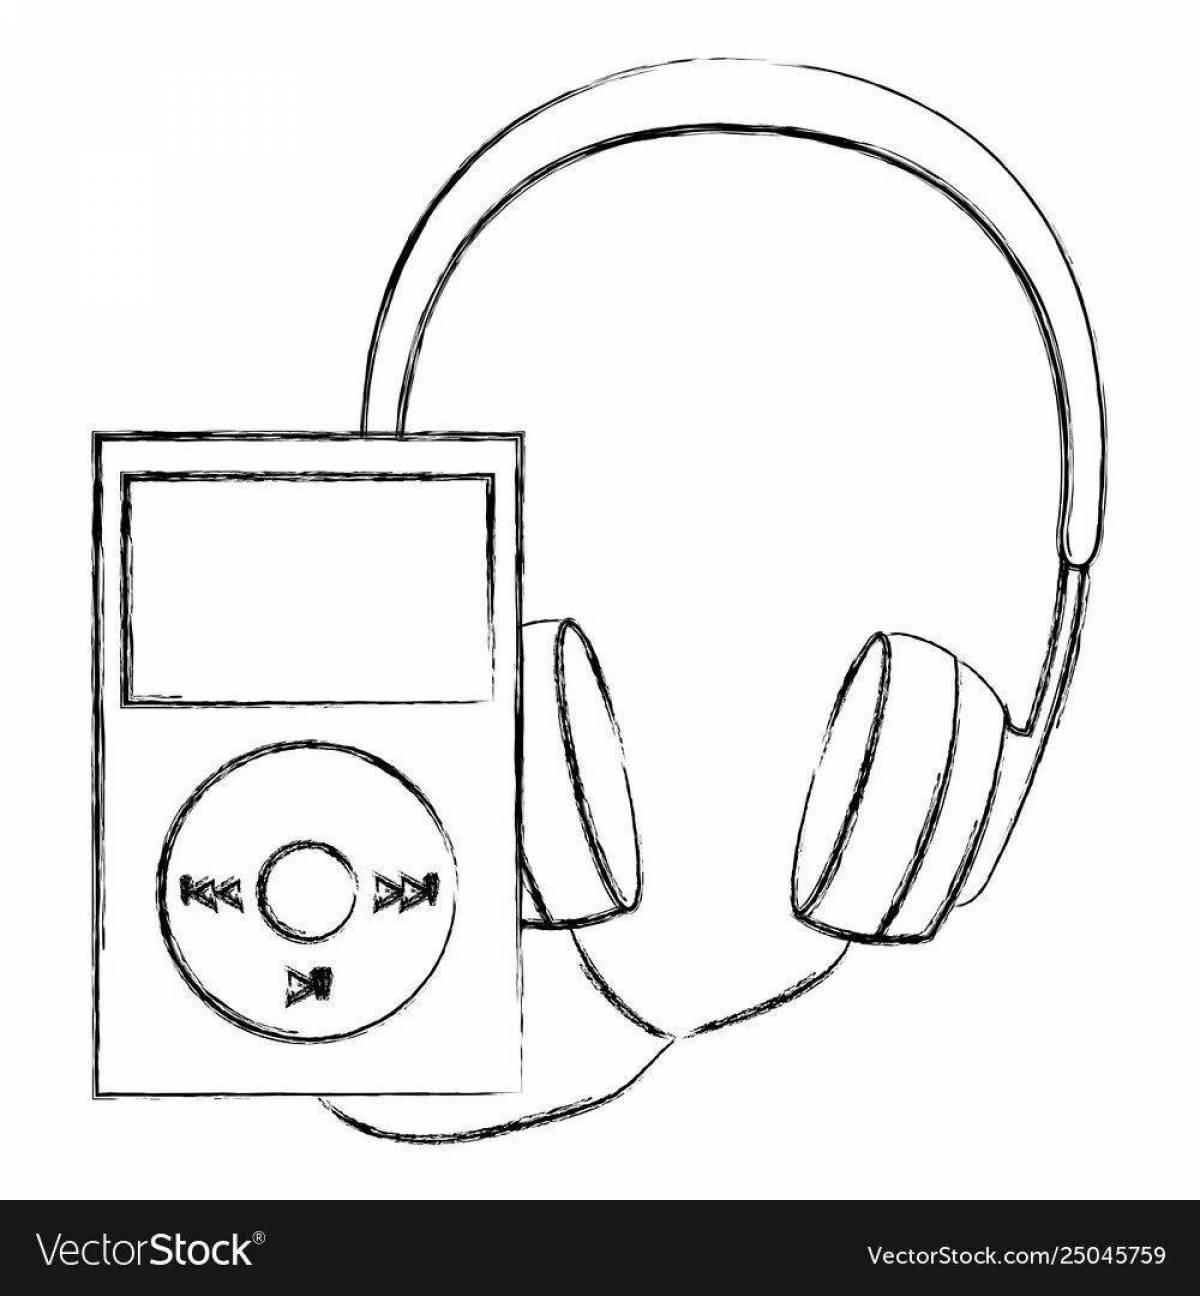 Fun headphone coloring for the little ones